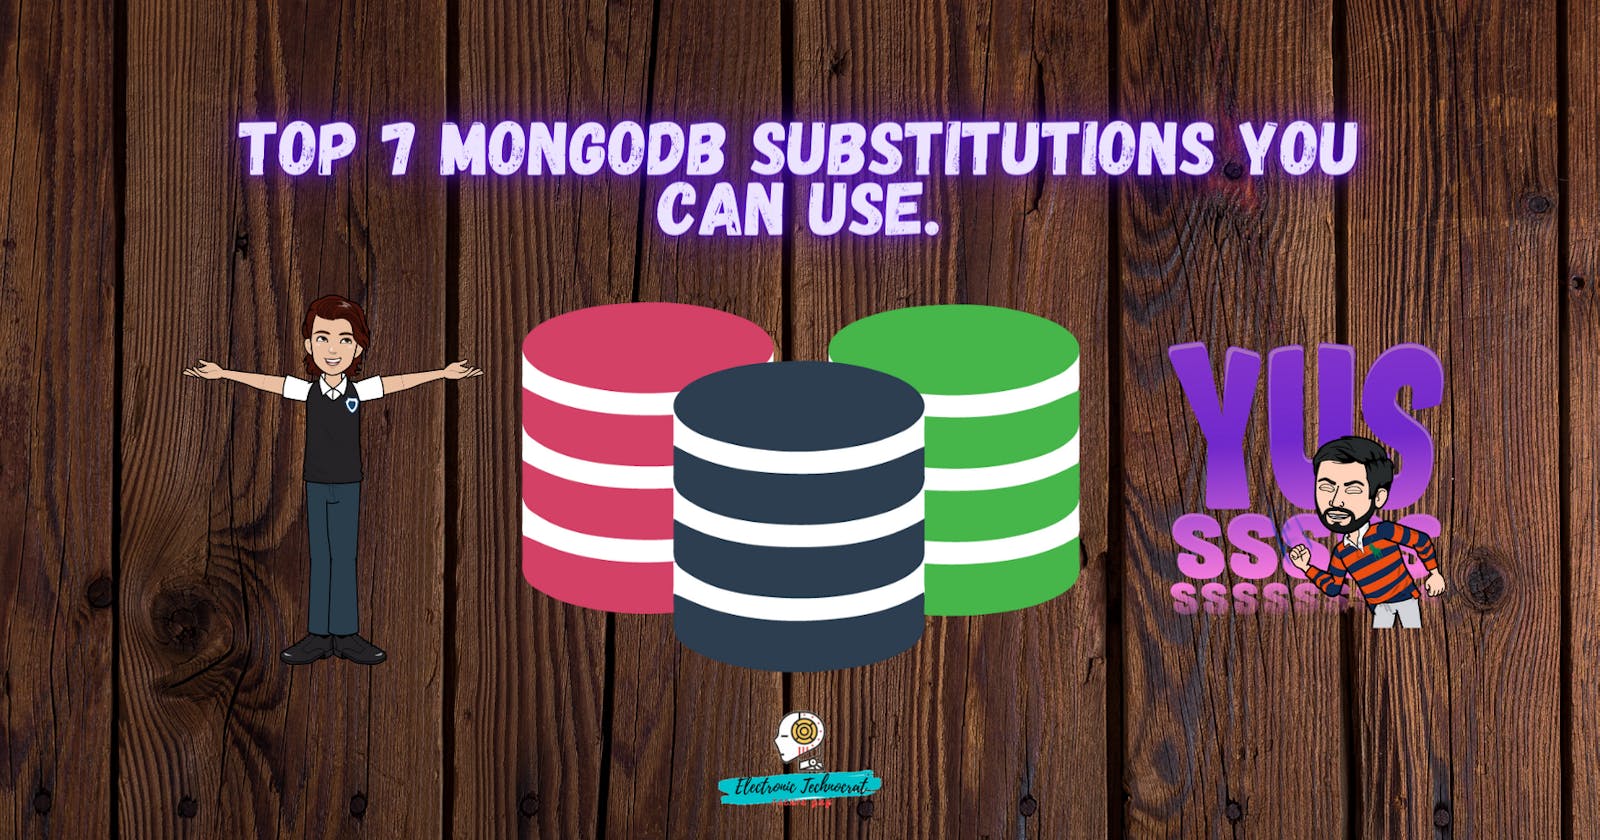 Top 7 MongoDB Substitutions you can use.